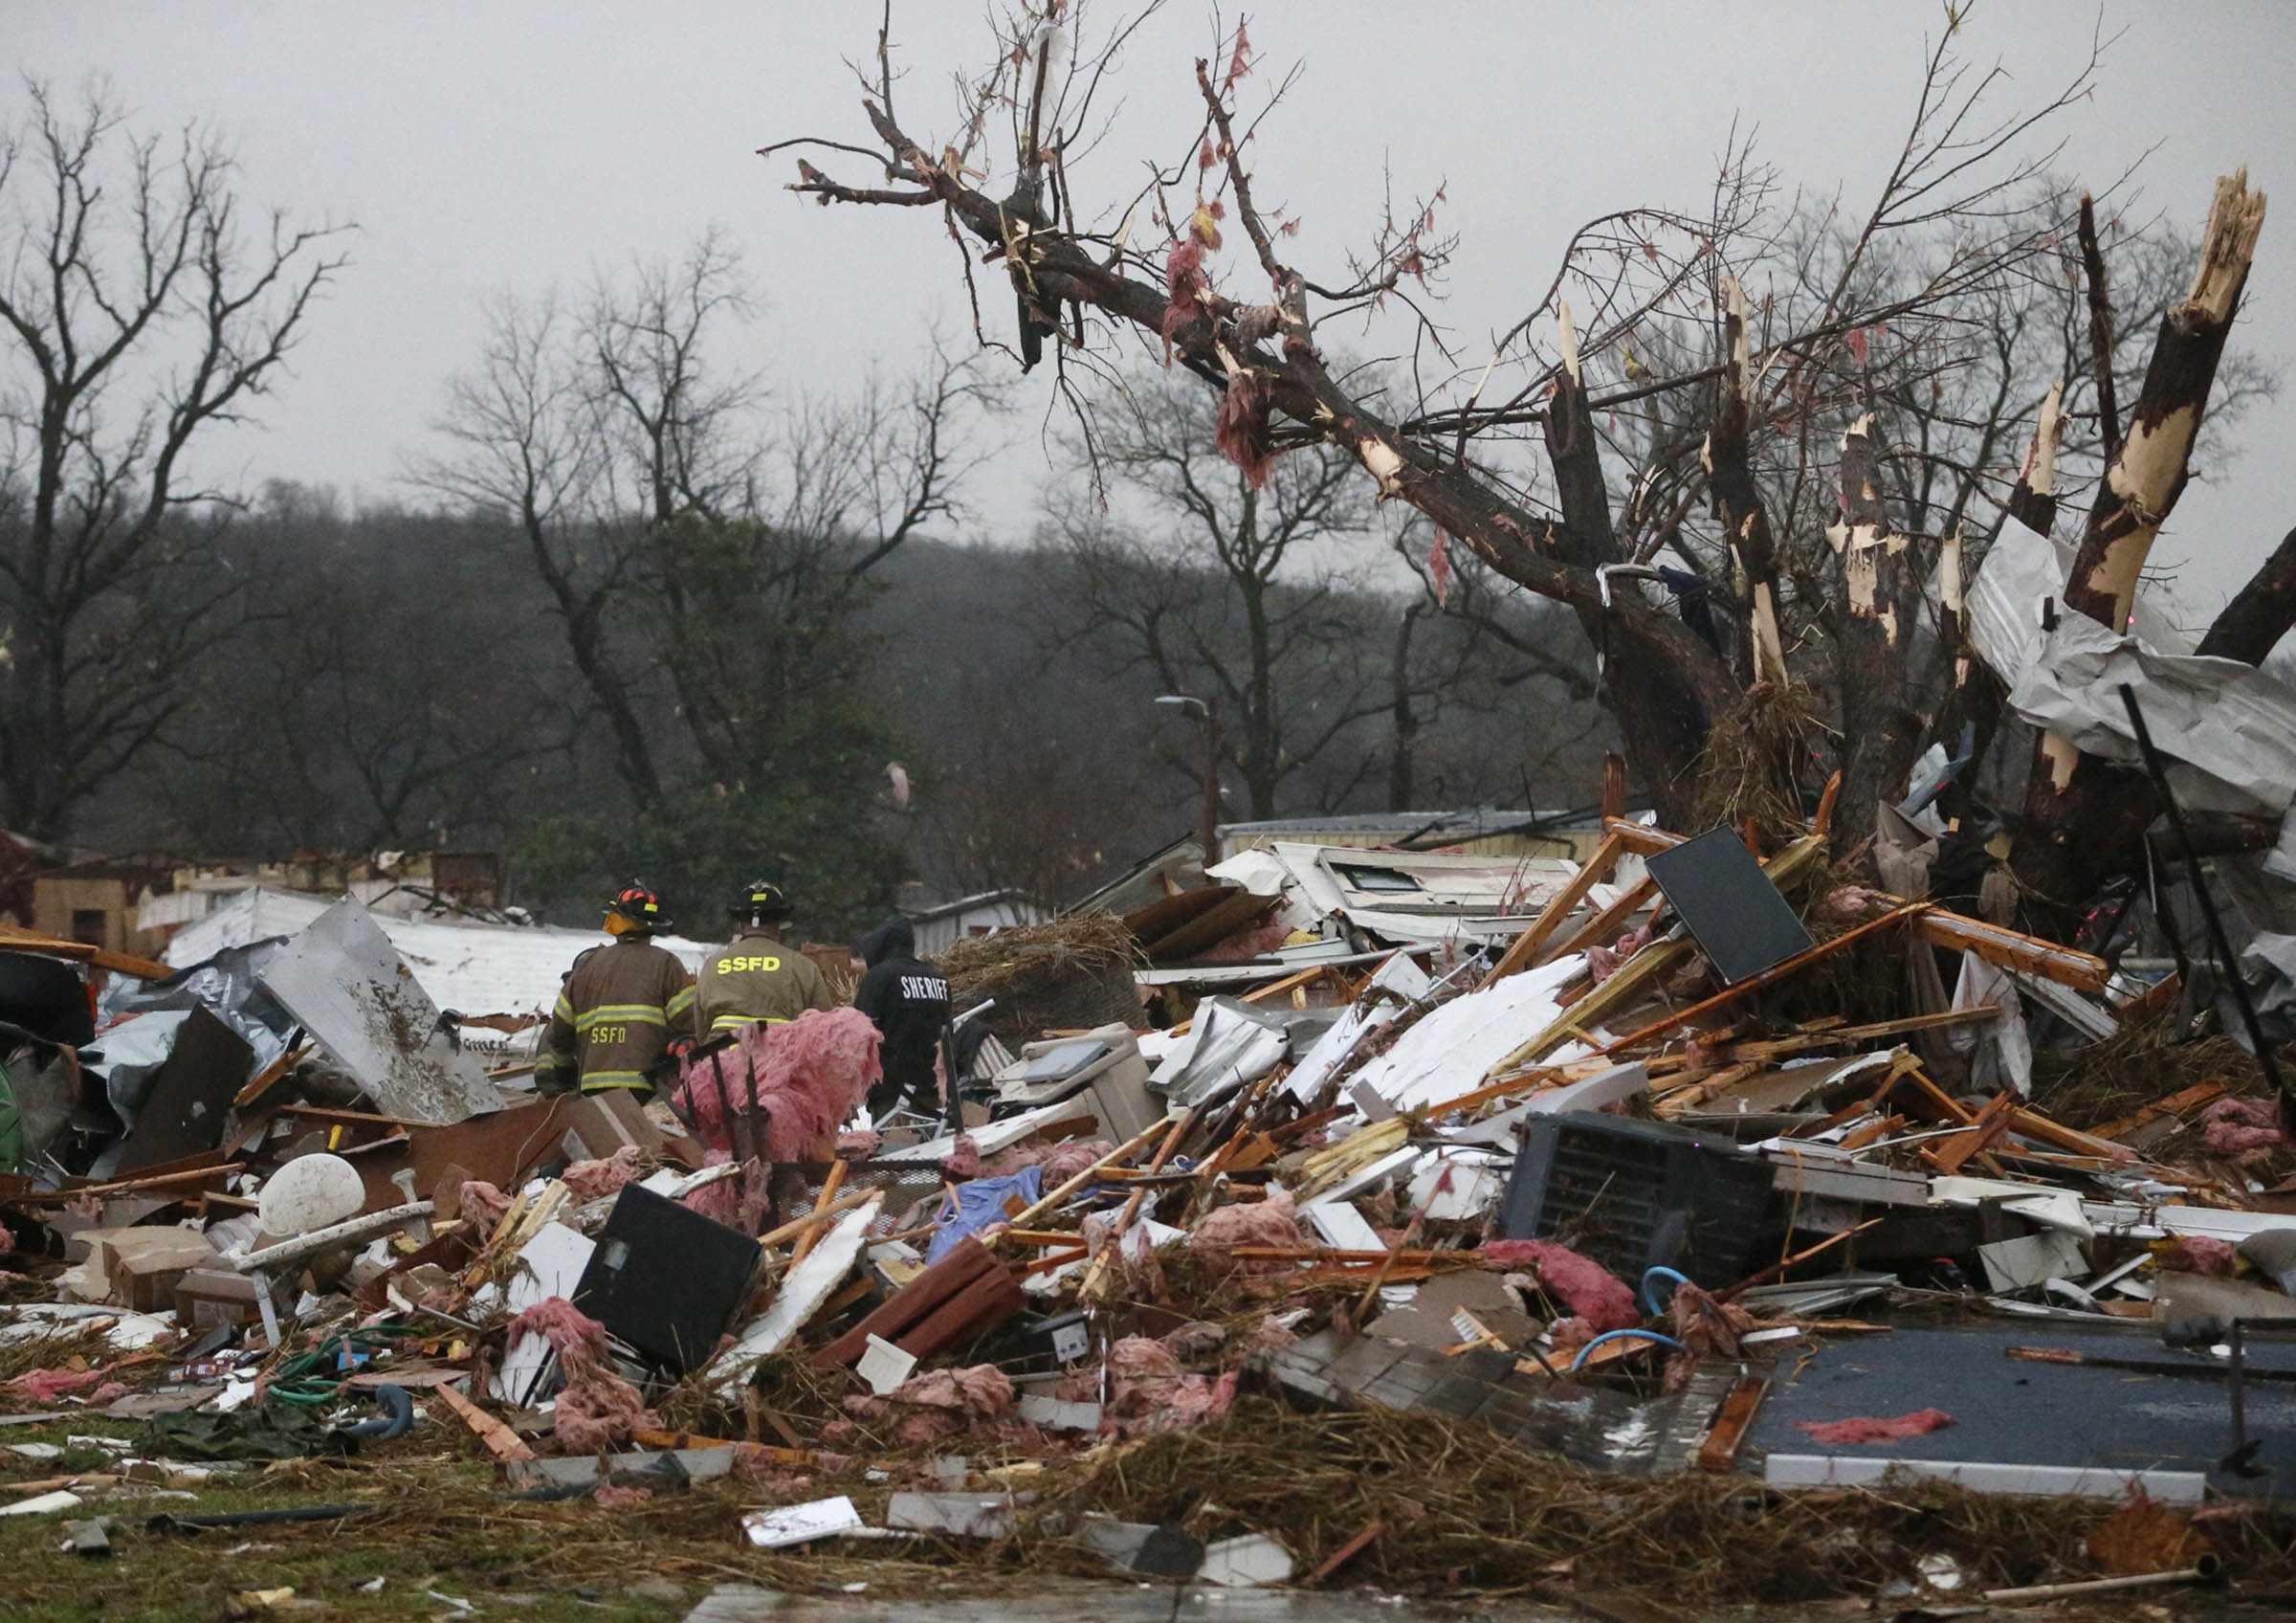 First responders work to free a man from a rubble pile after a round of severe weather hit a trailer park in Sand Springs, Okla., on March 25, 2015. (Matt Barnard—Tulsa World/AP)